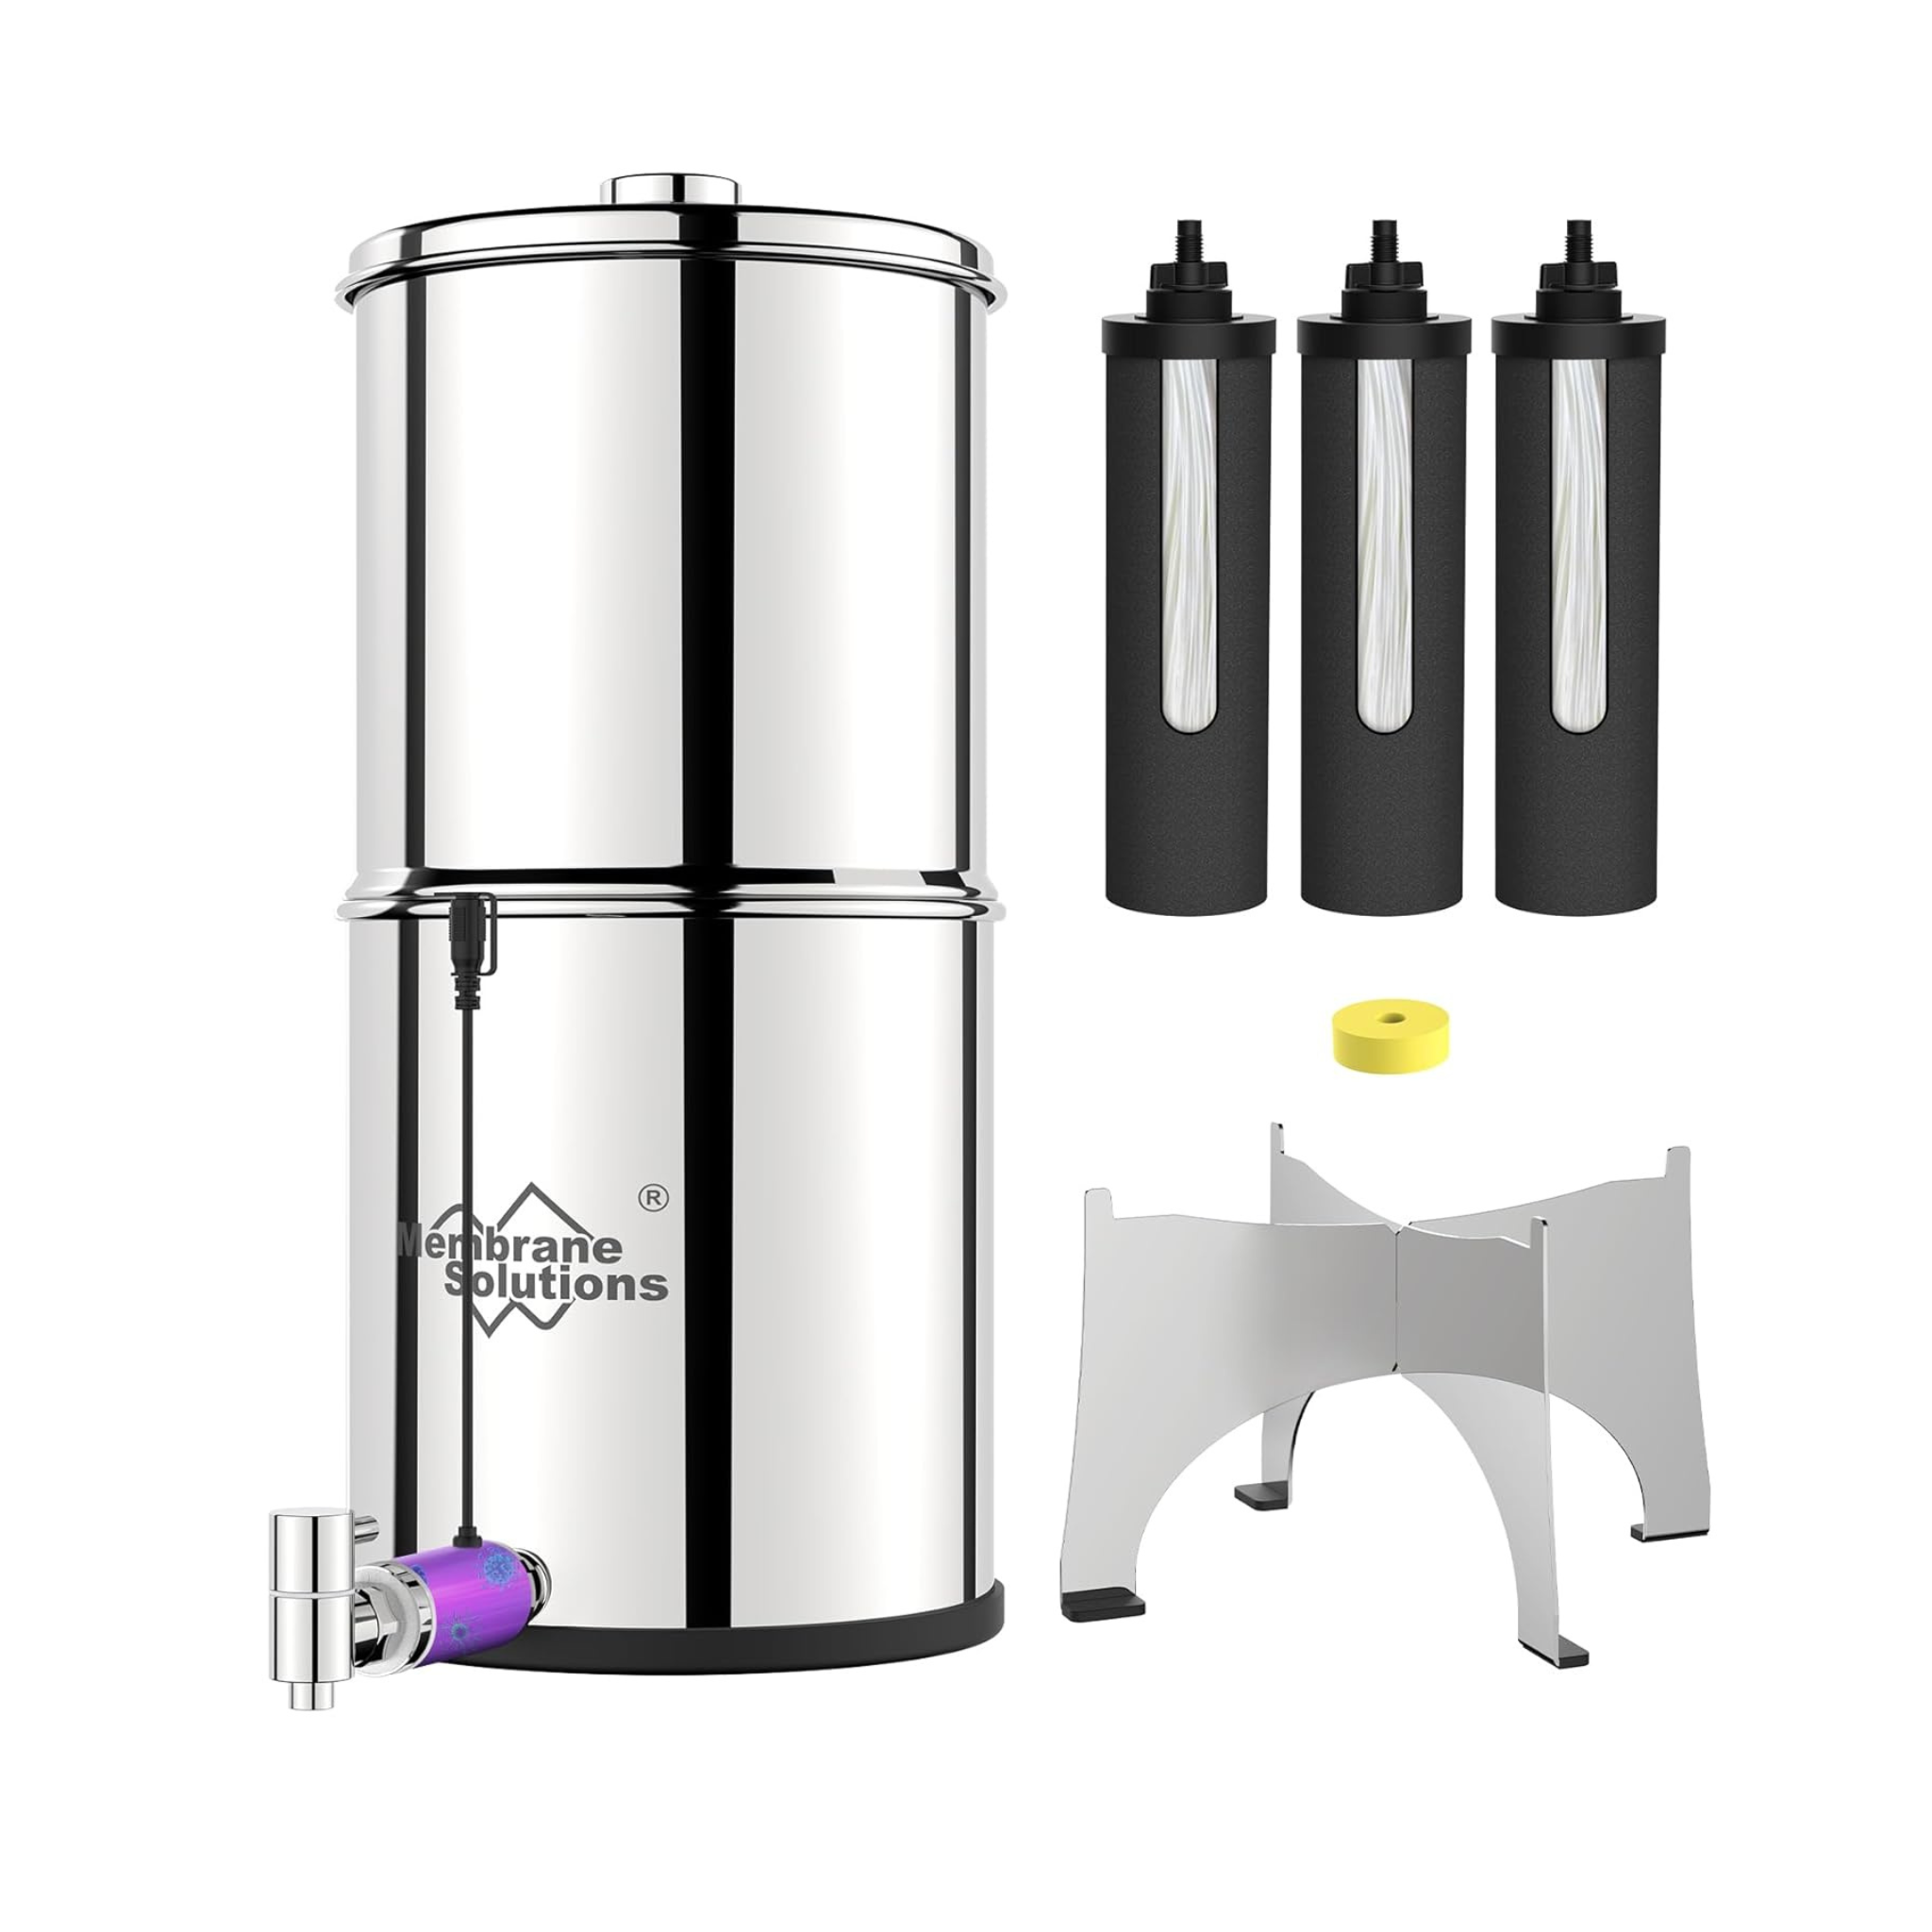 Membrane Solutions Stainless Steel UV Countertop 2.25G Water Filtration System